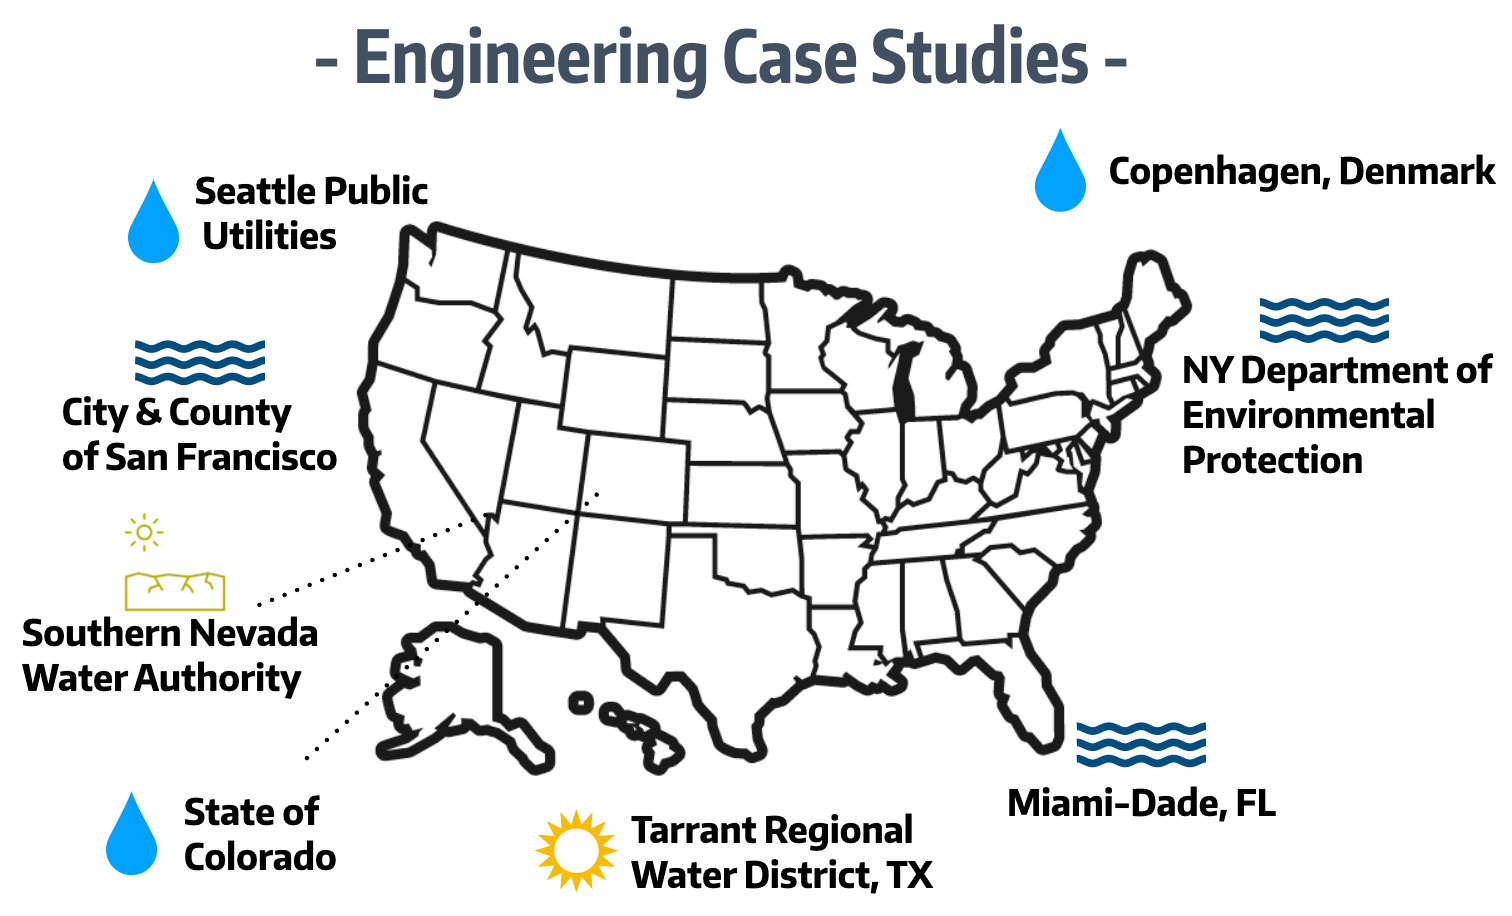 Graphic of USA map shows case studies come from Seattle Public Utilities, City & County of San Francisco, Southern Nevada Water Authority, State of Colorado, Tarrant Regional Water District in Texas, Miami-Dade Florida, NY Department of Environmental Protection and Copenhagen Denmark.